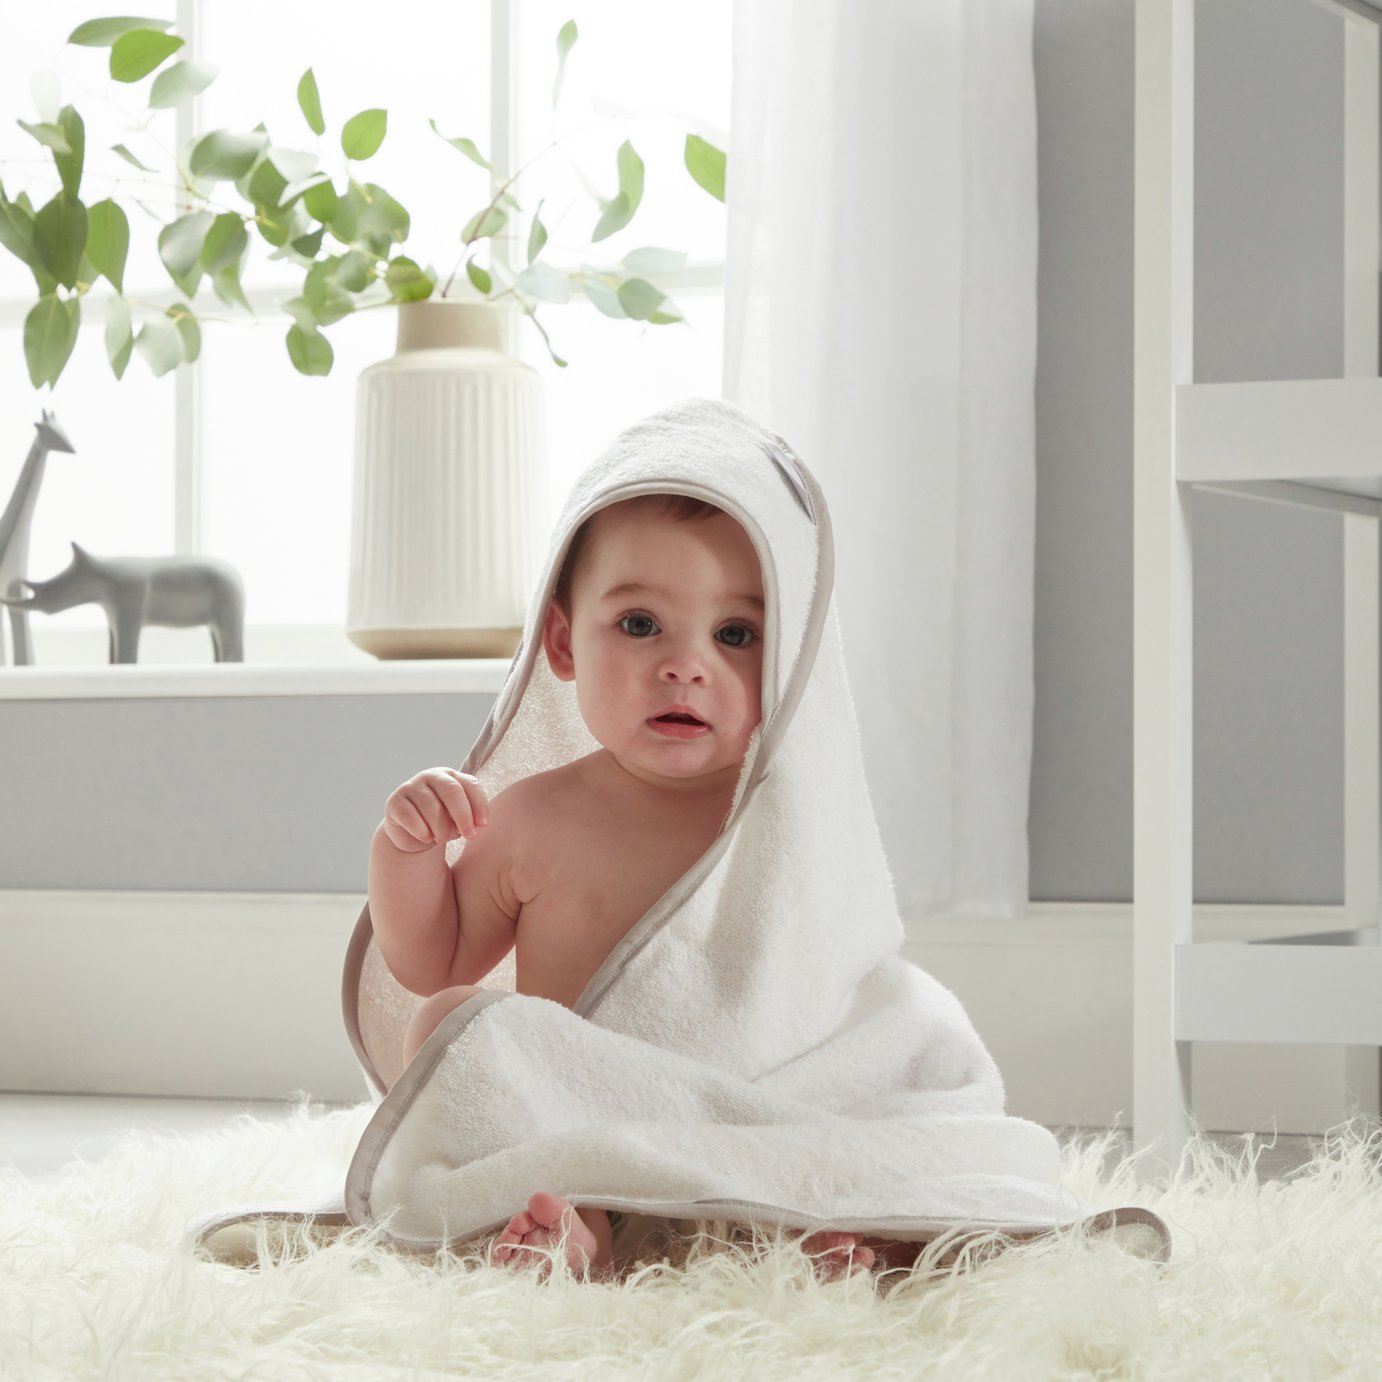 Shnuggle Hooded Towel Review